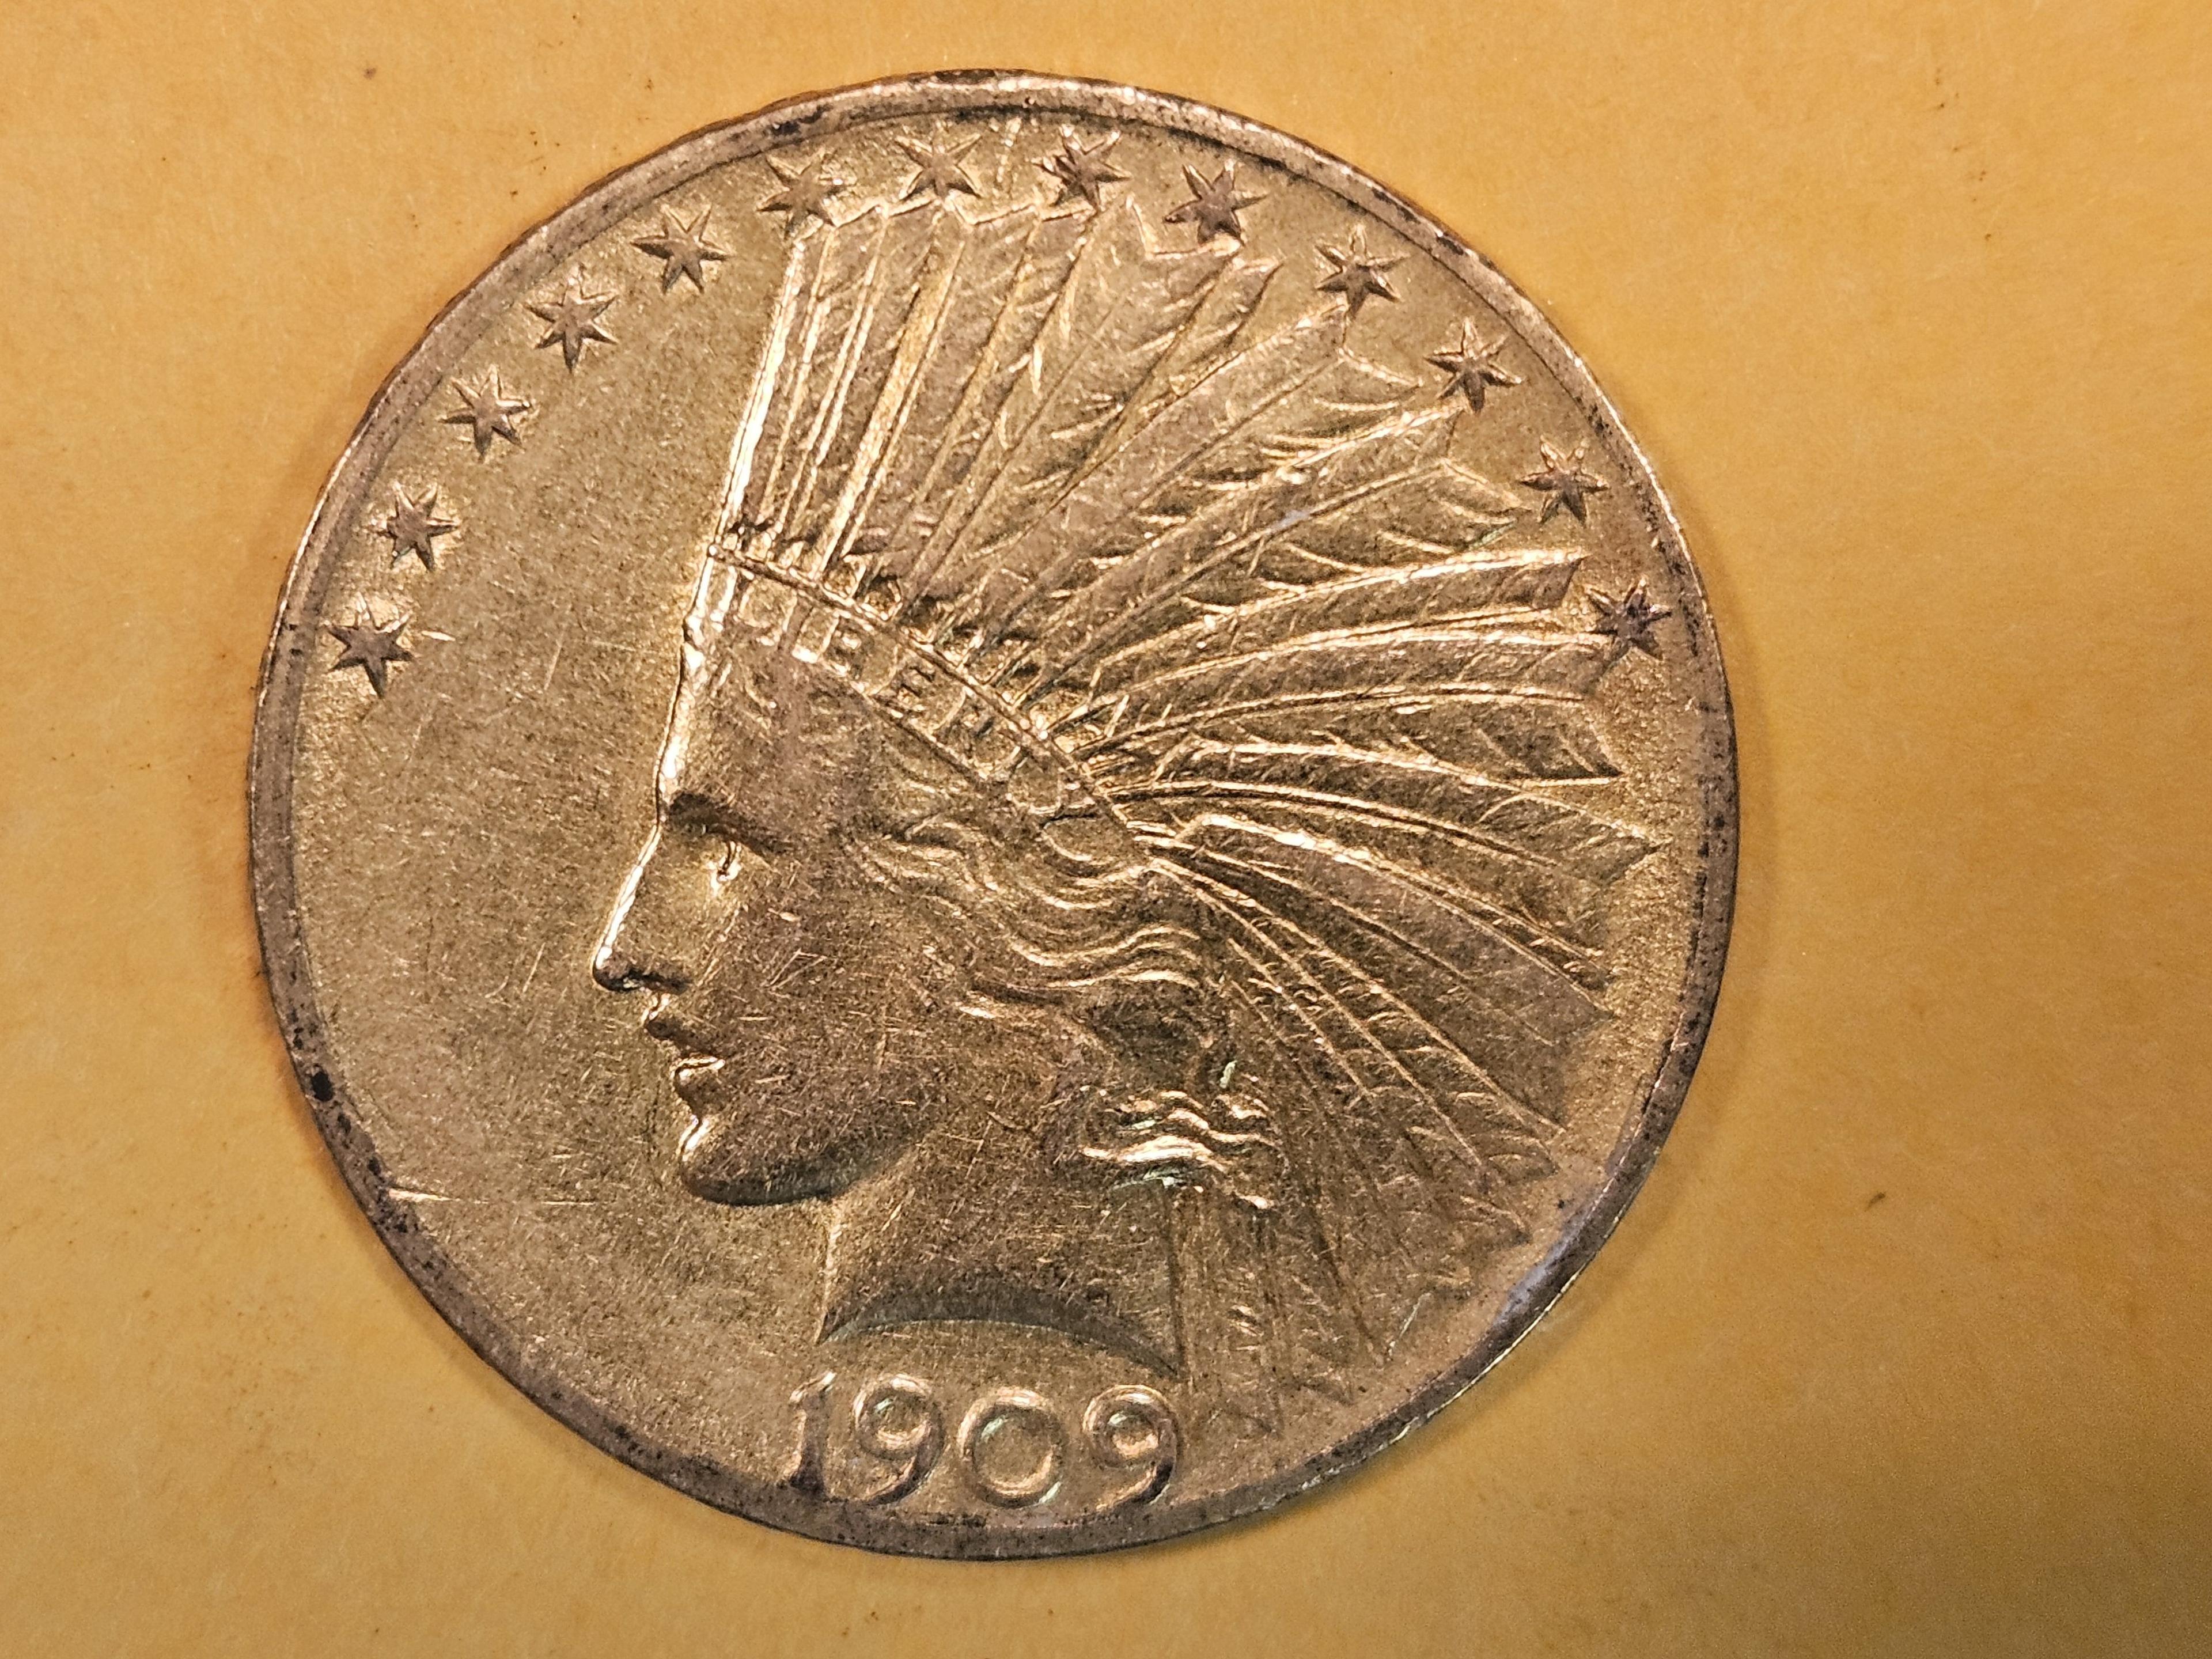 GOLD! Brilliant About Uncirculated 1909 Gold Ten Dollar Indian